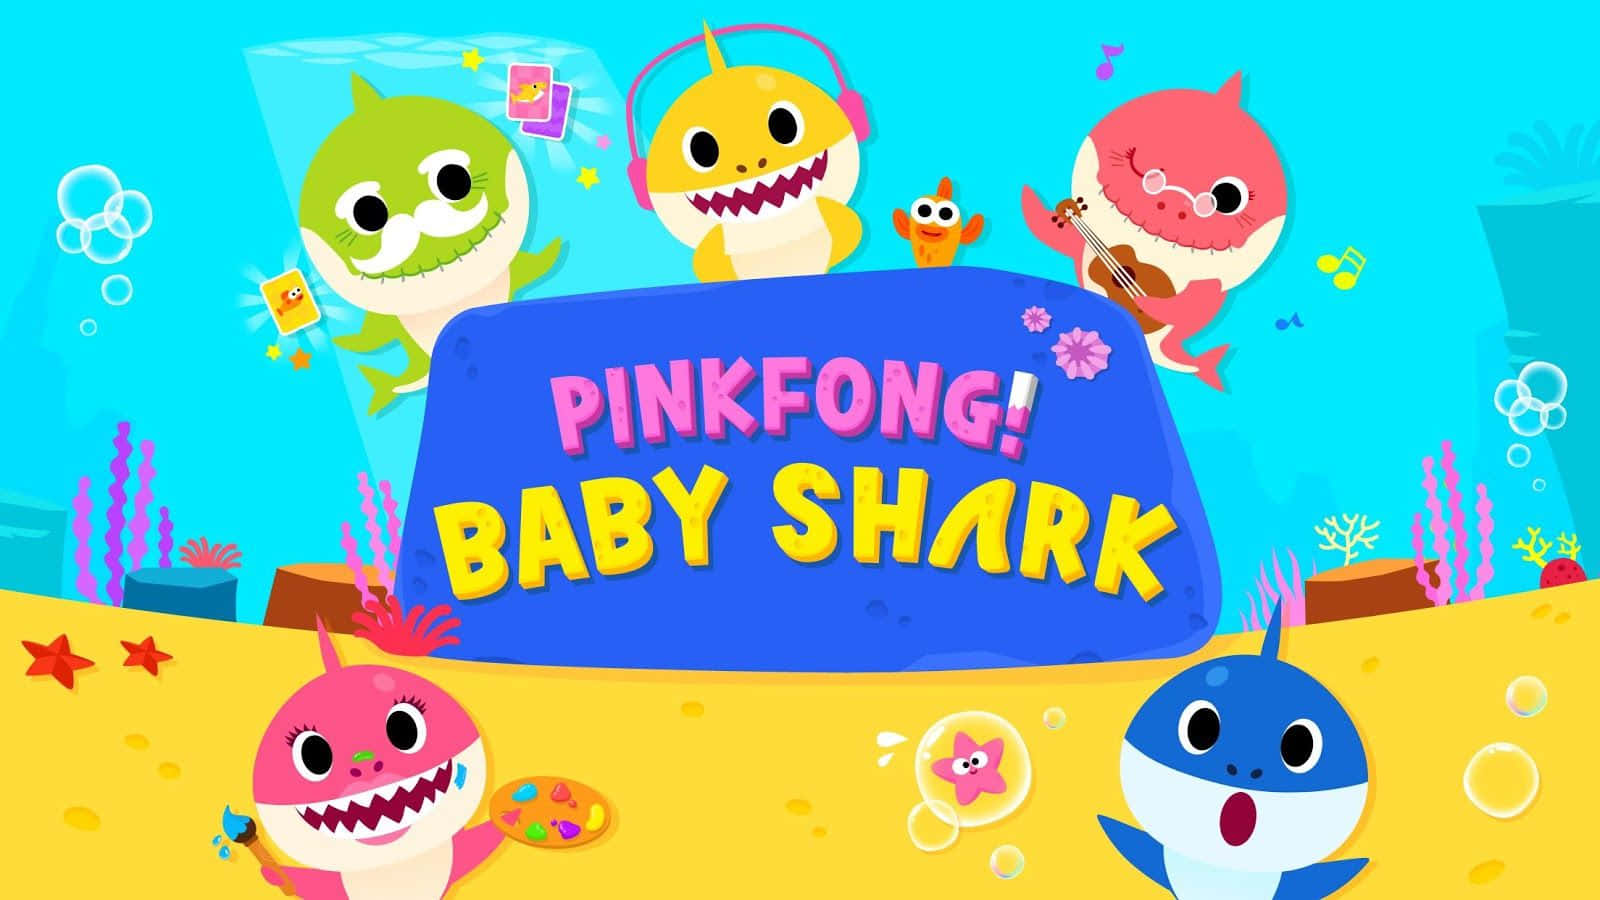 Celebrate family fun with Baby Shark!